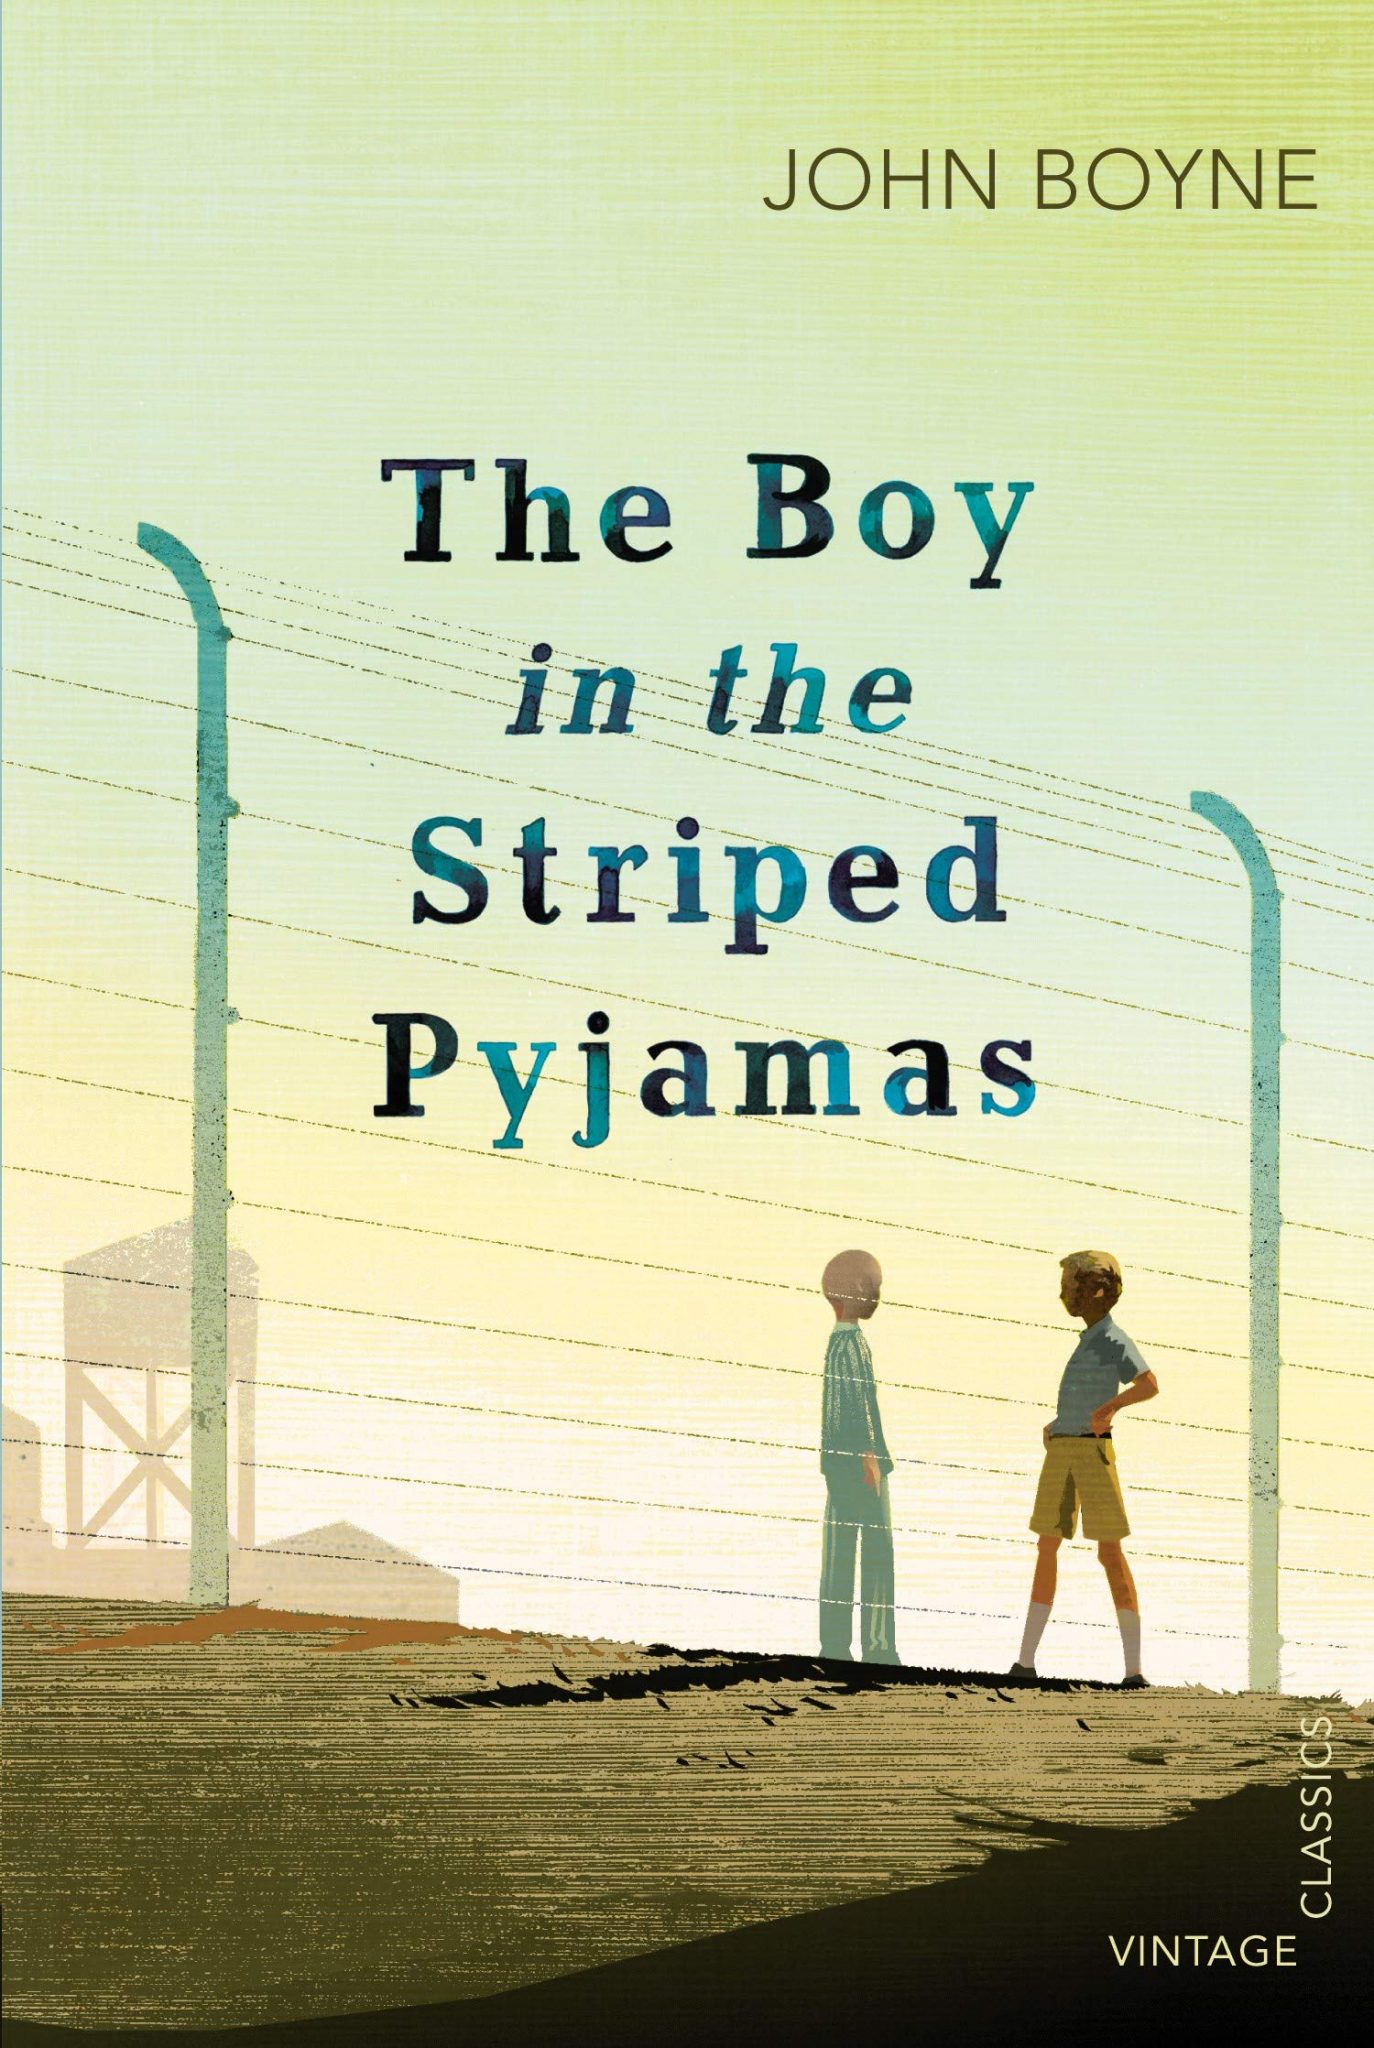 essay about the boy in the striped pajamas